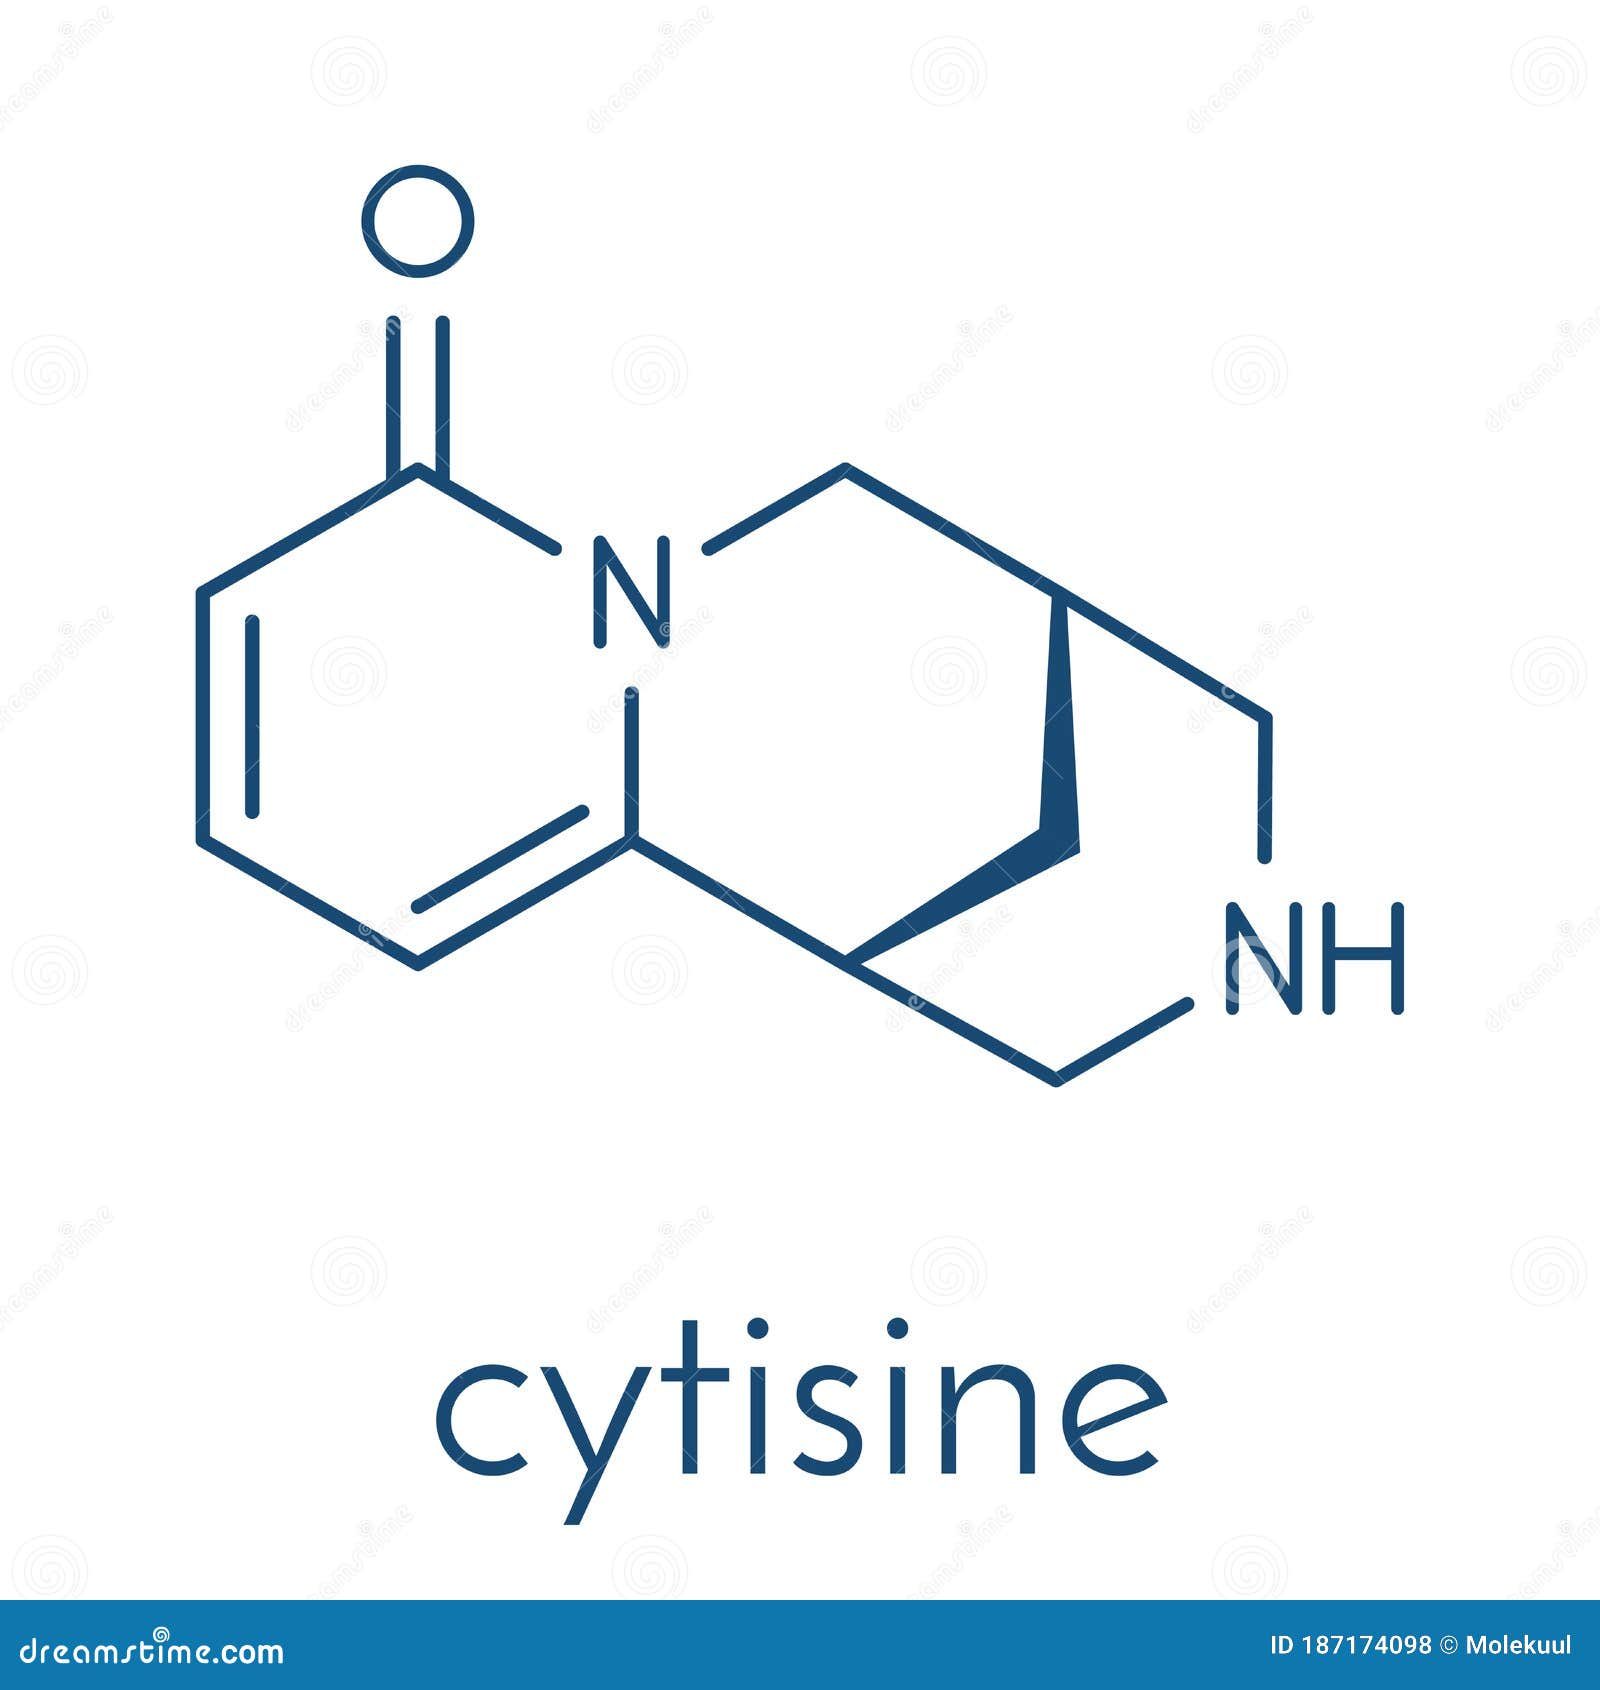 Cytisine-Based Nicotinic Partial Agonists as Novel Antidepressant Compounds  - Journal of Pharmacology and Experimental Therapeutics